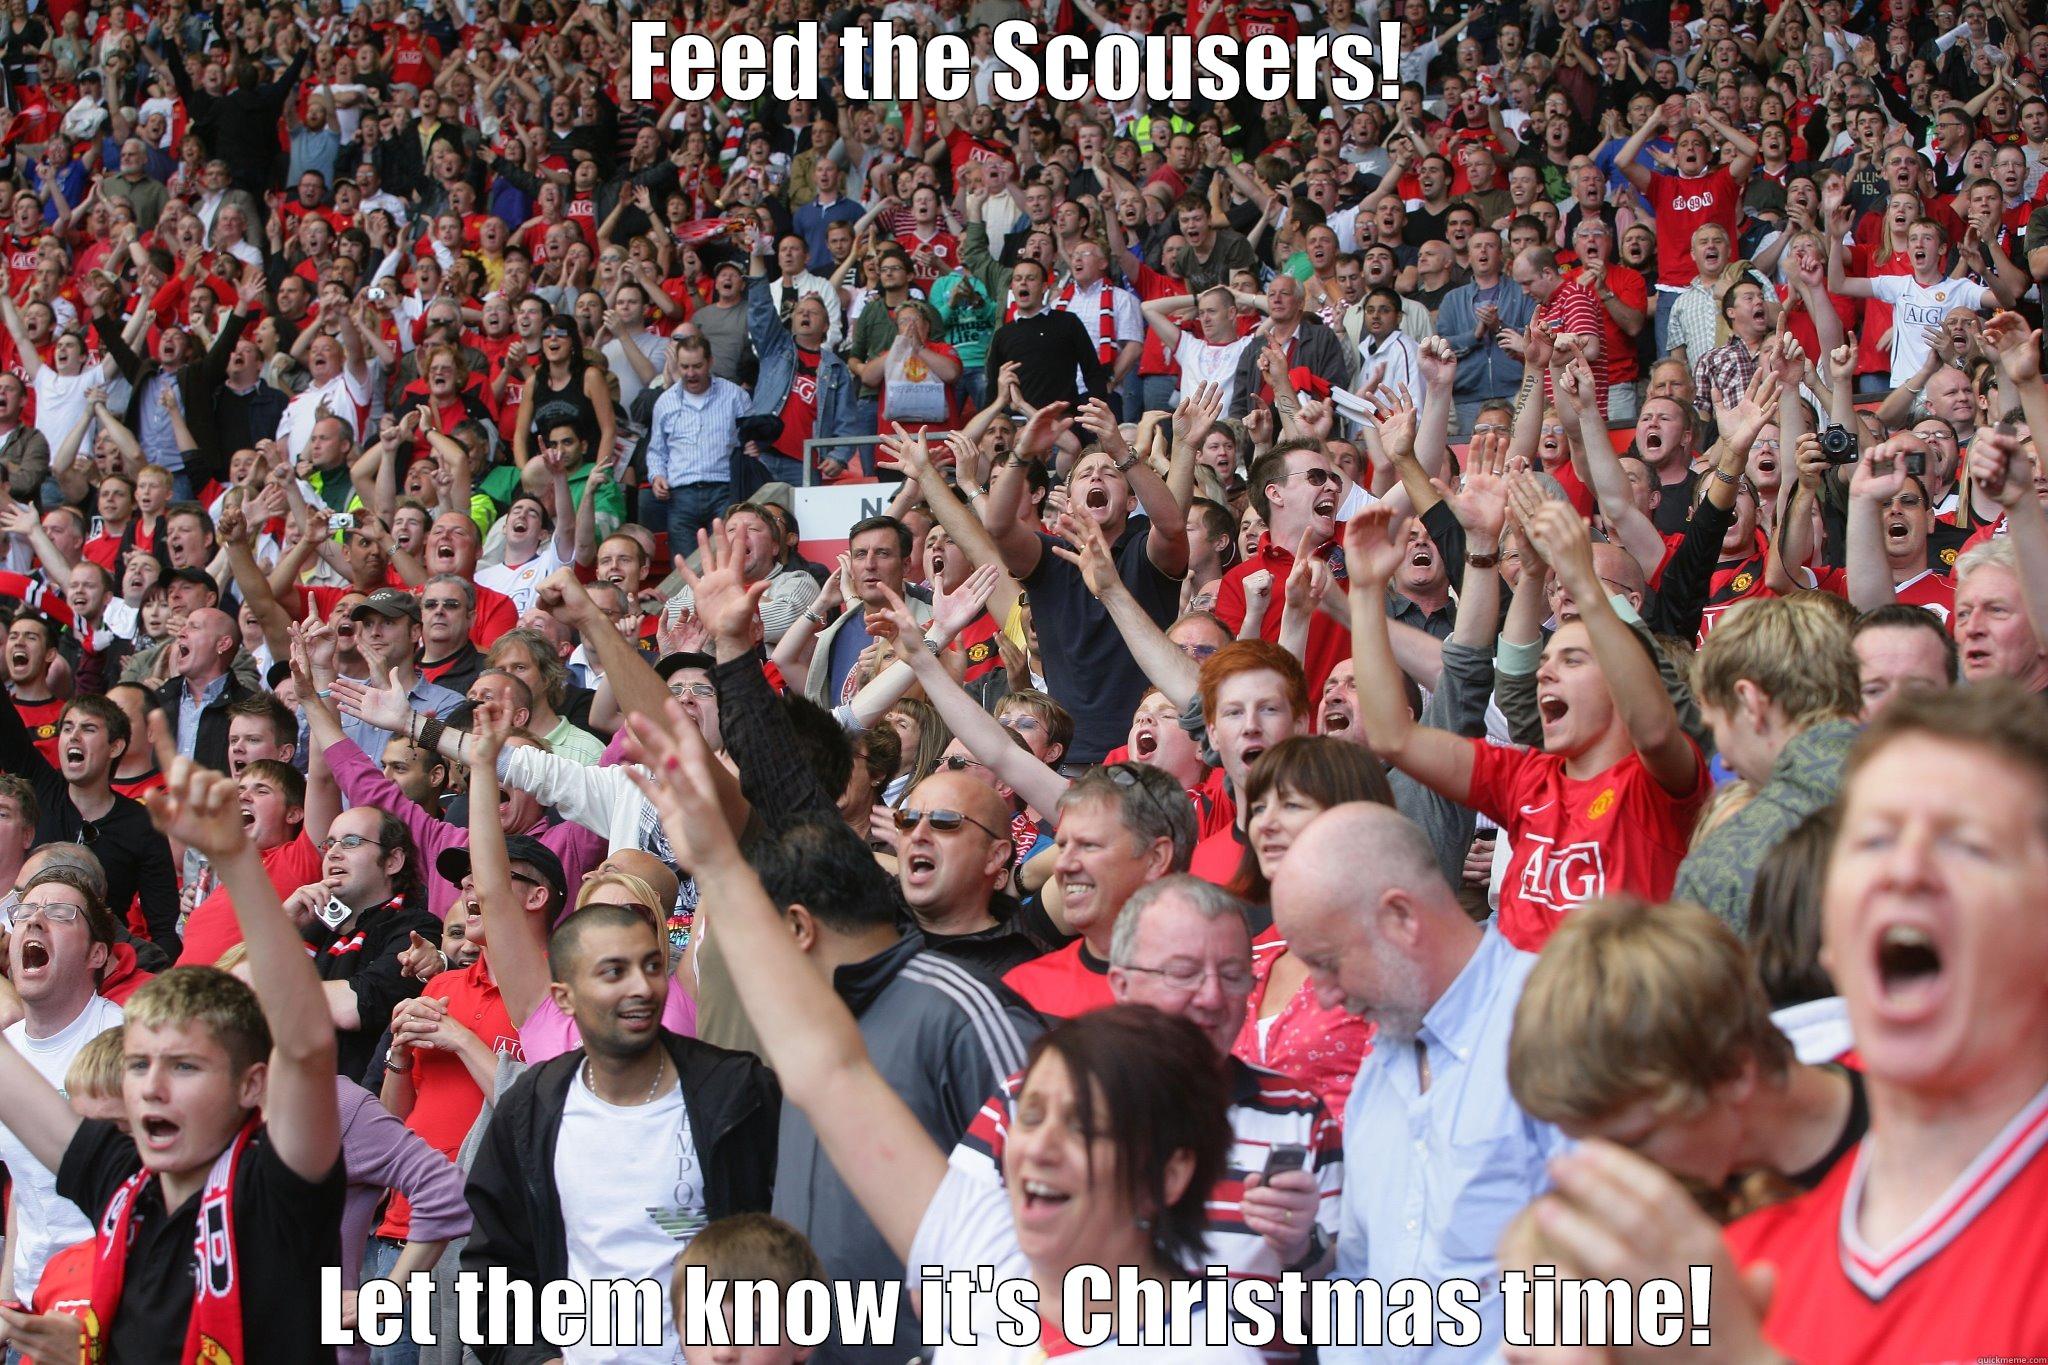 what puts me in the Christmas spirit - FEED THE SCOUSERS! LET THEM KNOW IT'S CHRISTMAS TIME! Misc